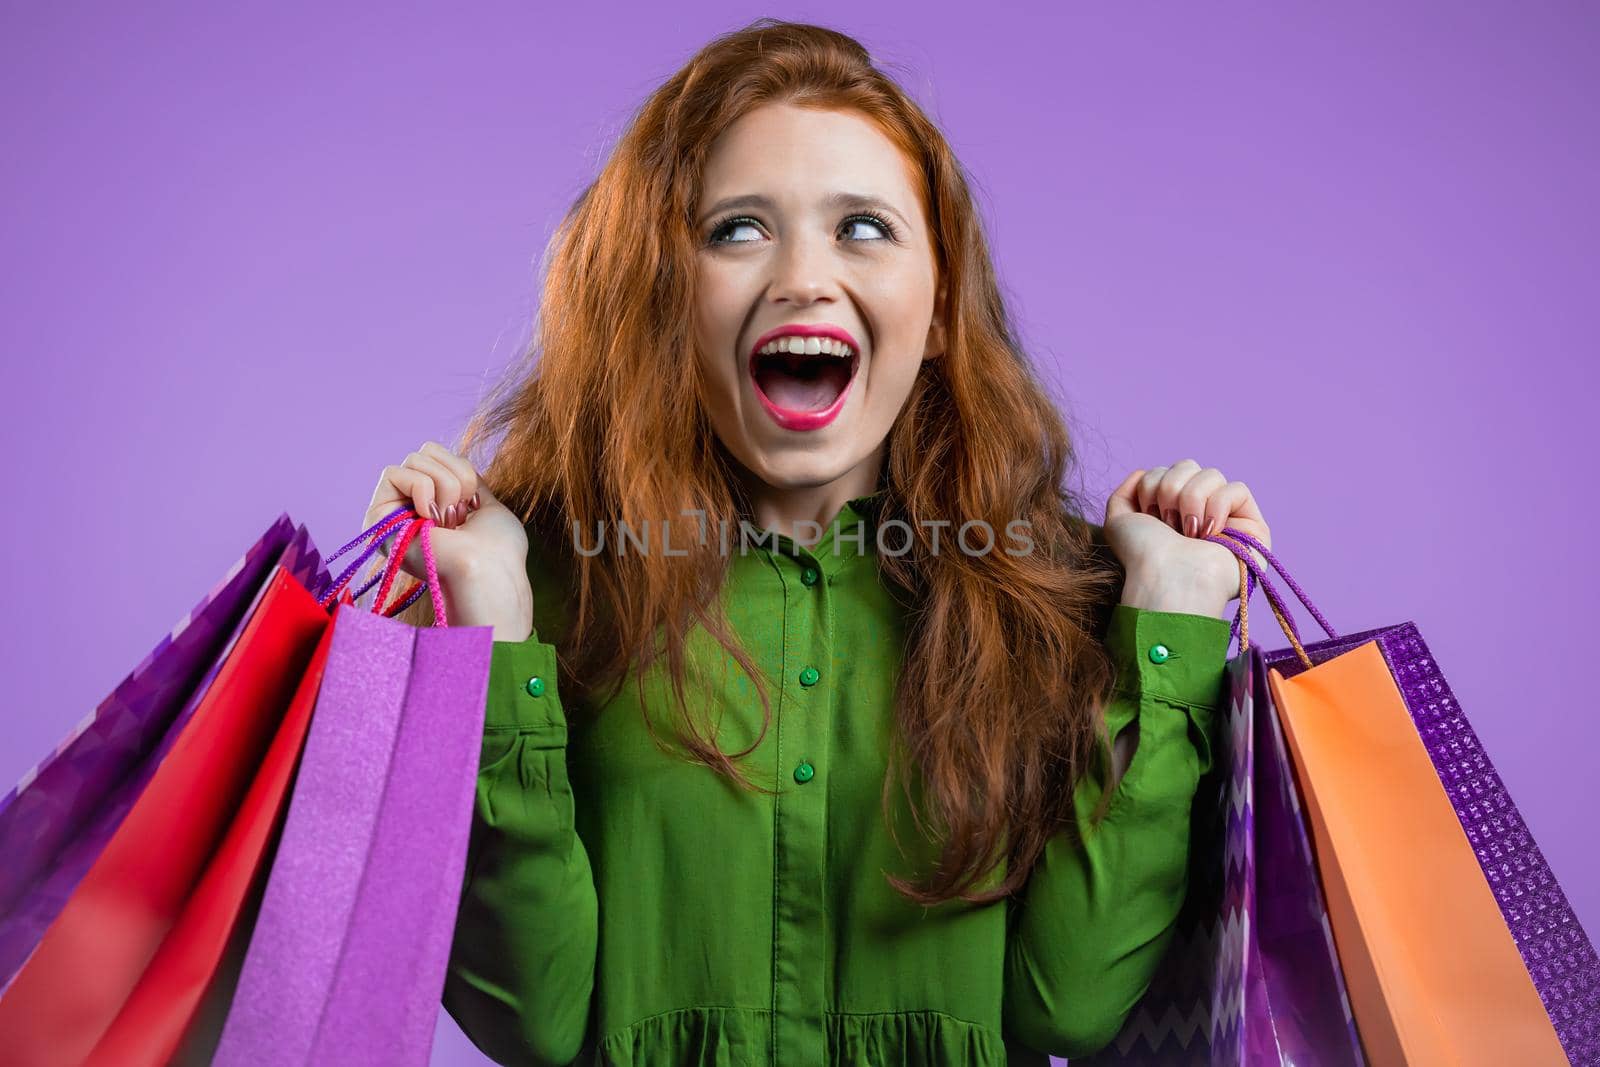 Excited woman with colorful paper bags after shopping on violet studio background. Concept of seasonal sale, purchases, spending money on gifts. High quality photo